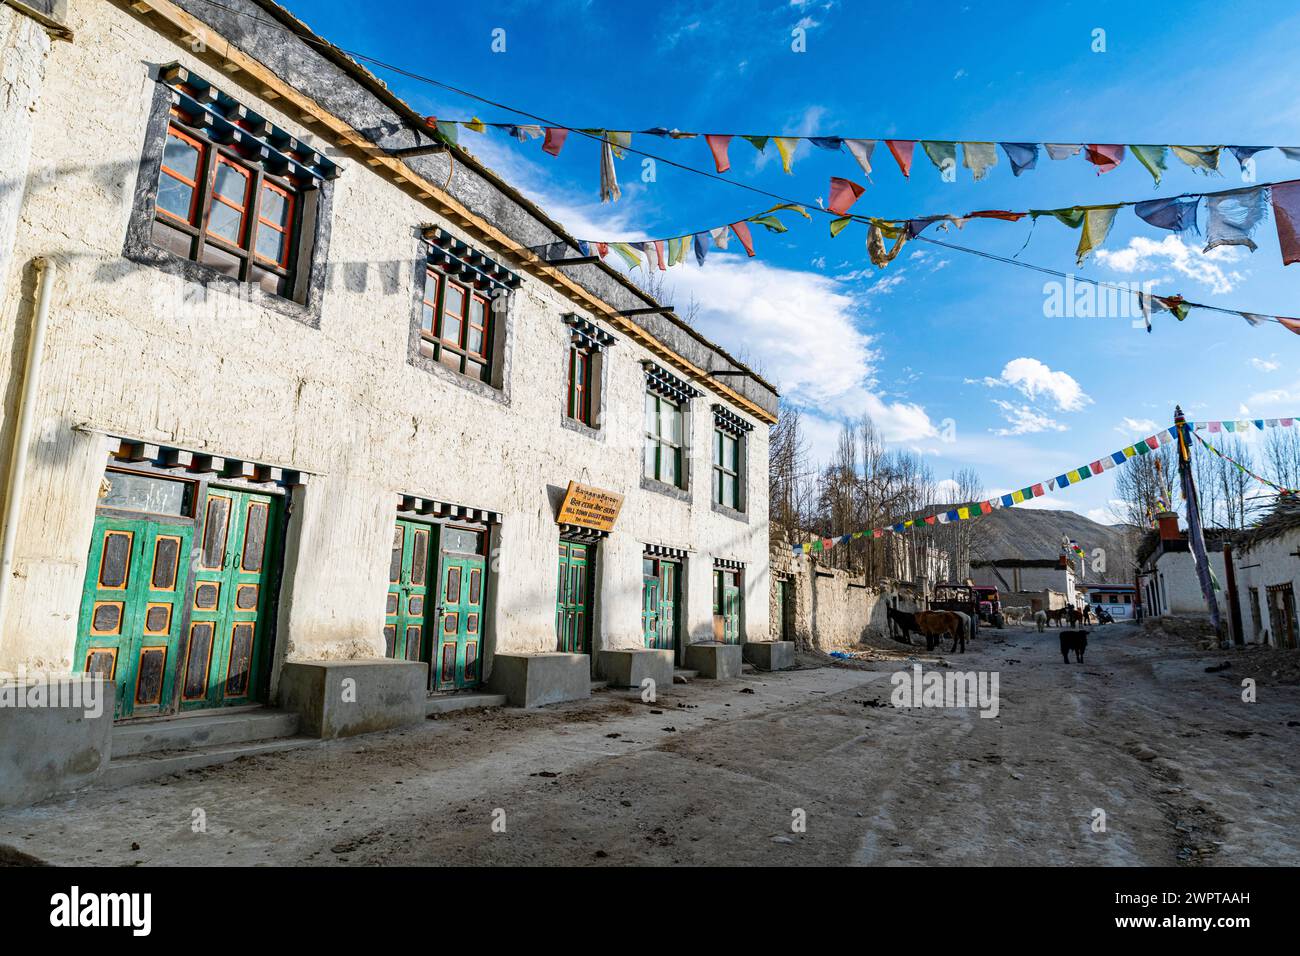 Tibetan houses in Lo Manthang, capital of the Kingdom of Mustang, Nepal Stock Photo